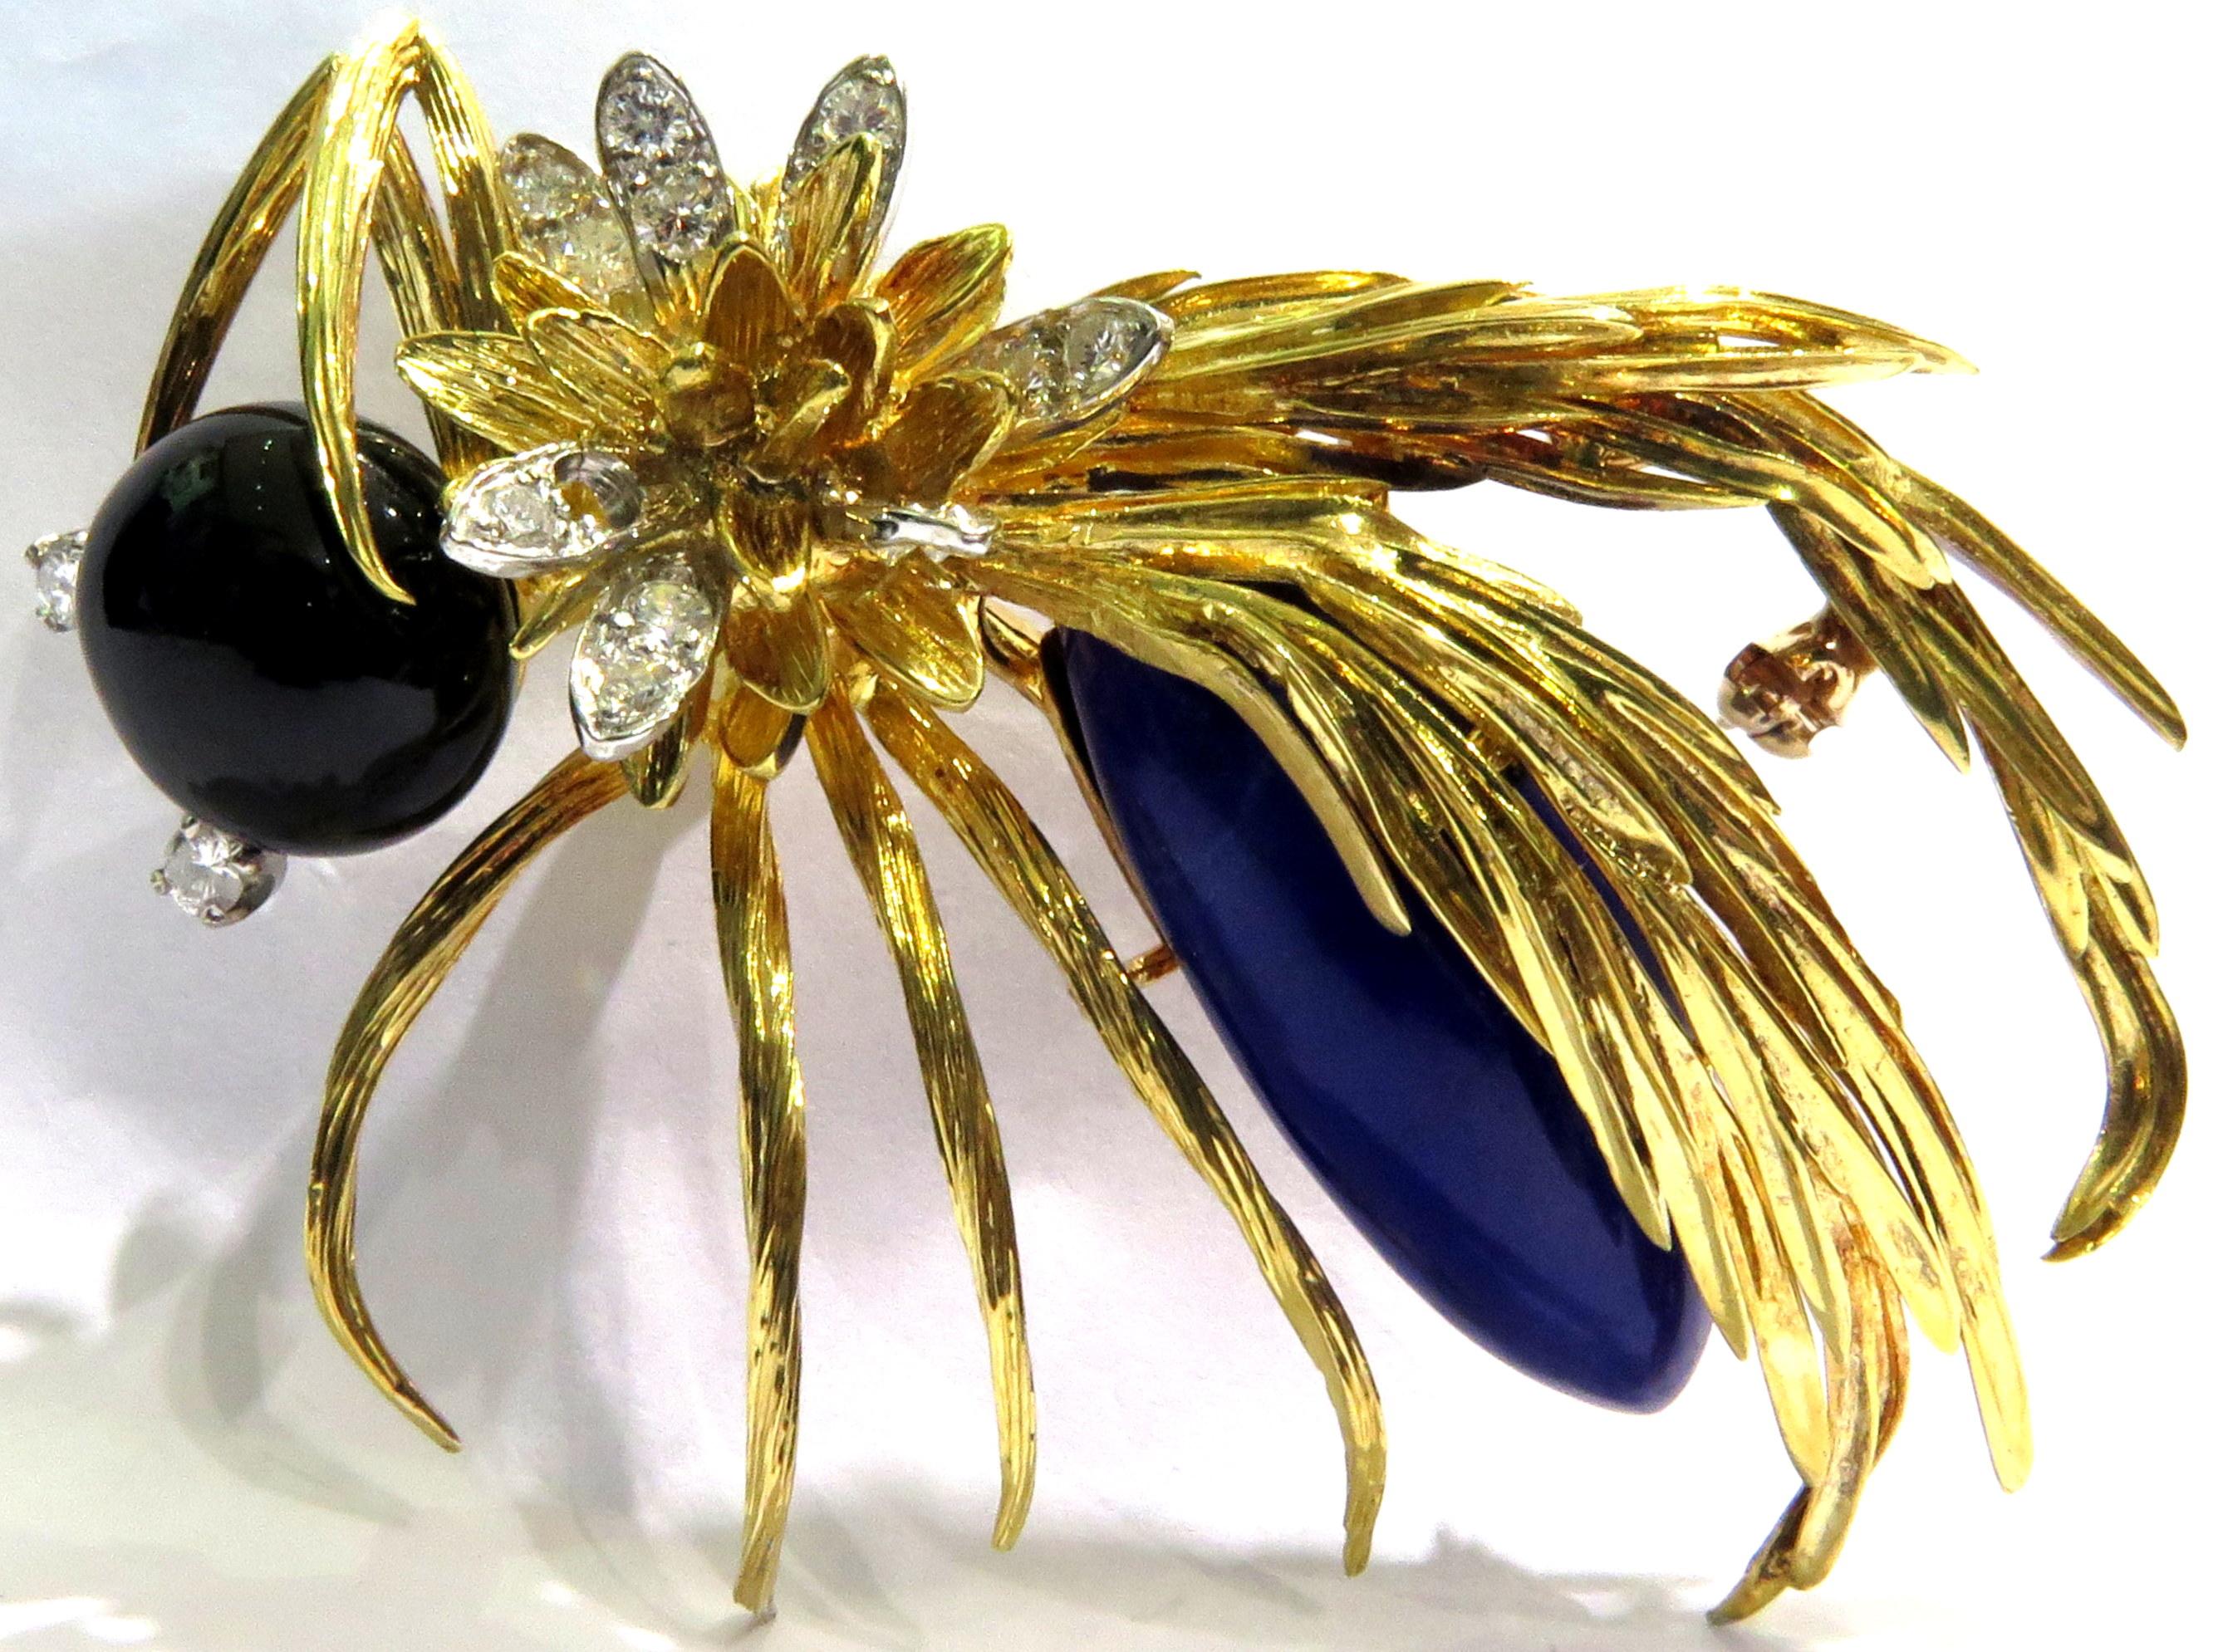 Huge Hammerman Brothers Platinum Gold Wasp Pin Brooch With Diamonds Lapis & Onyx For Sale 6